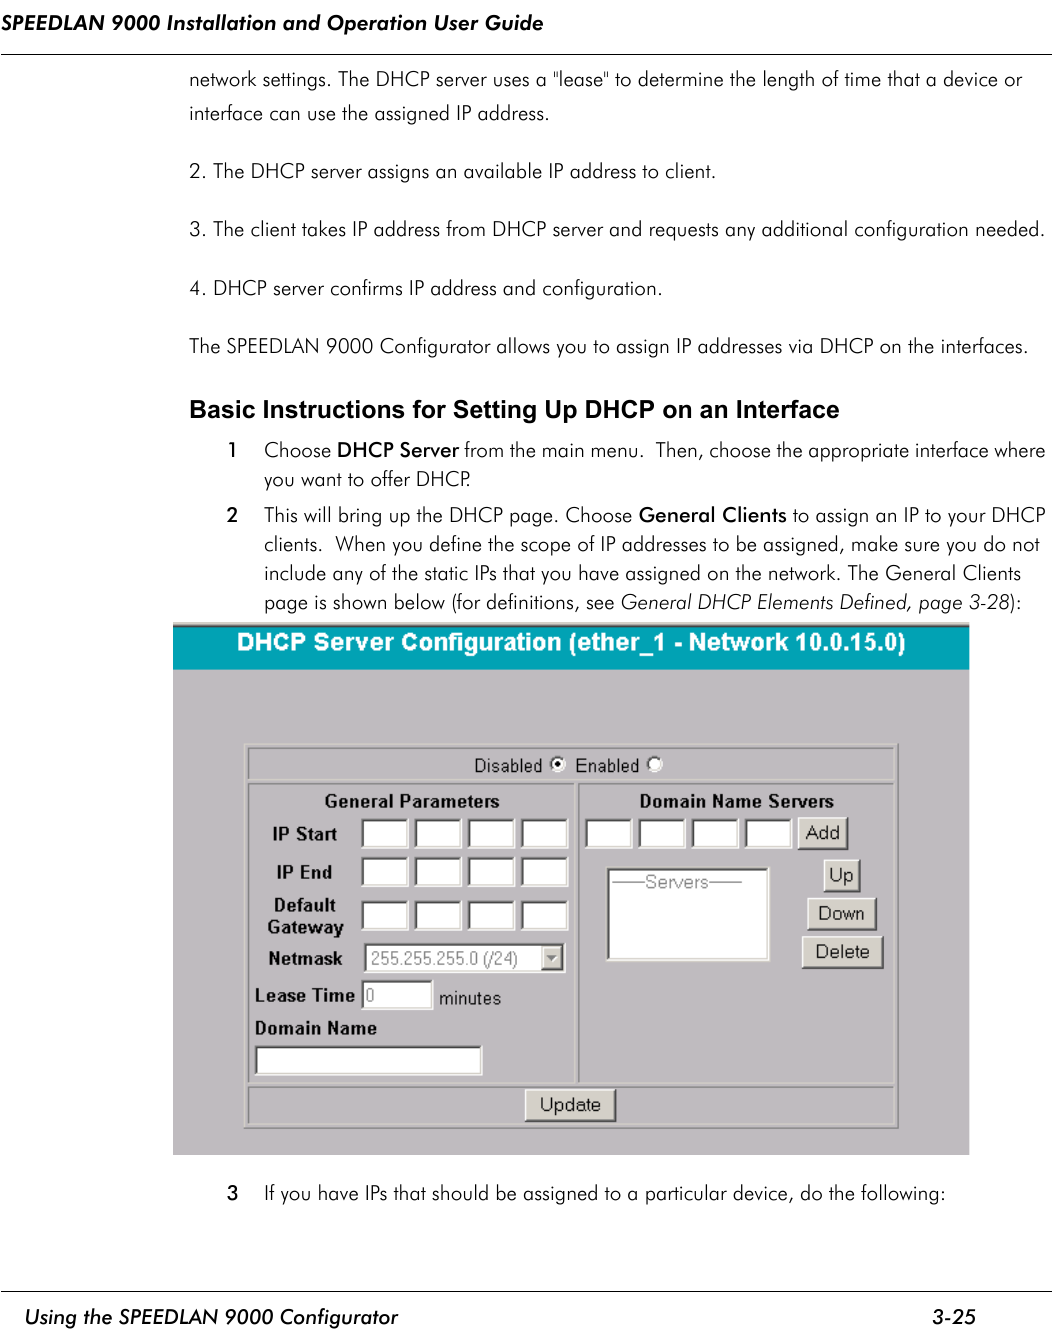 SPEEDLAN 9000 Installation and Operation User Guide     Using the SPEEDLAN 9000 Configurator 3-25                                                                                                                                                              network settings. The DHCP server uses a &quot;lease&quot; to determine the length of time that a device or interface can use the assigned IP address.2. The DHCP server assigns an available IP address to client. 3. The client takes IP address from DHCP server and requests any additional configuration needed. 4. DHCP server confirms IP address and configuration. The SPEEDLAN 9000 Configurator allows you to assign IP addresses via DHCP on the interfaces.  Basic Instructions for Setting Up DHCP on an Interface 1Choose DHCP Server from the main menu.  Then, choose the appropriate interface where you want to offer DHCP.  2This will bring up the DHCP page. Choose General Clients to assign an IP to your DHCP clients.  When you define the scope of IP addresses to be assigned, make sure you do not include any of the static IPs that you have assigned on the network. The General Clients page is shown below (for definitions, see General DHCP Elements Defined, page 3-28):3If you have IPs that should be assigned to a particular device, do the following: